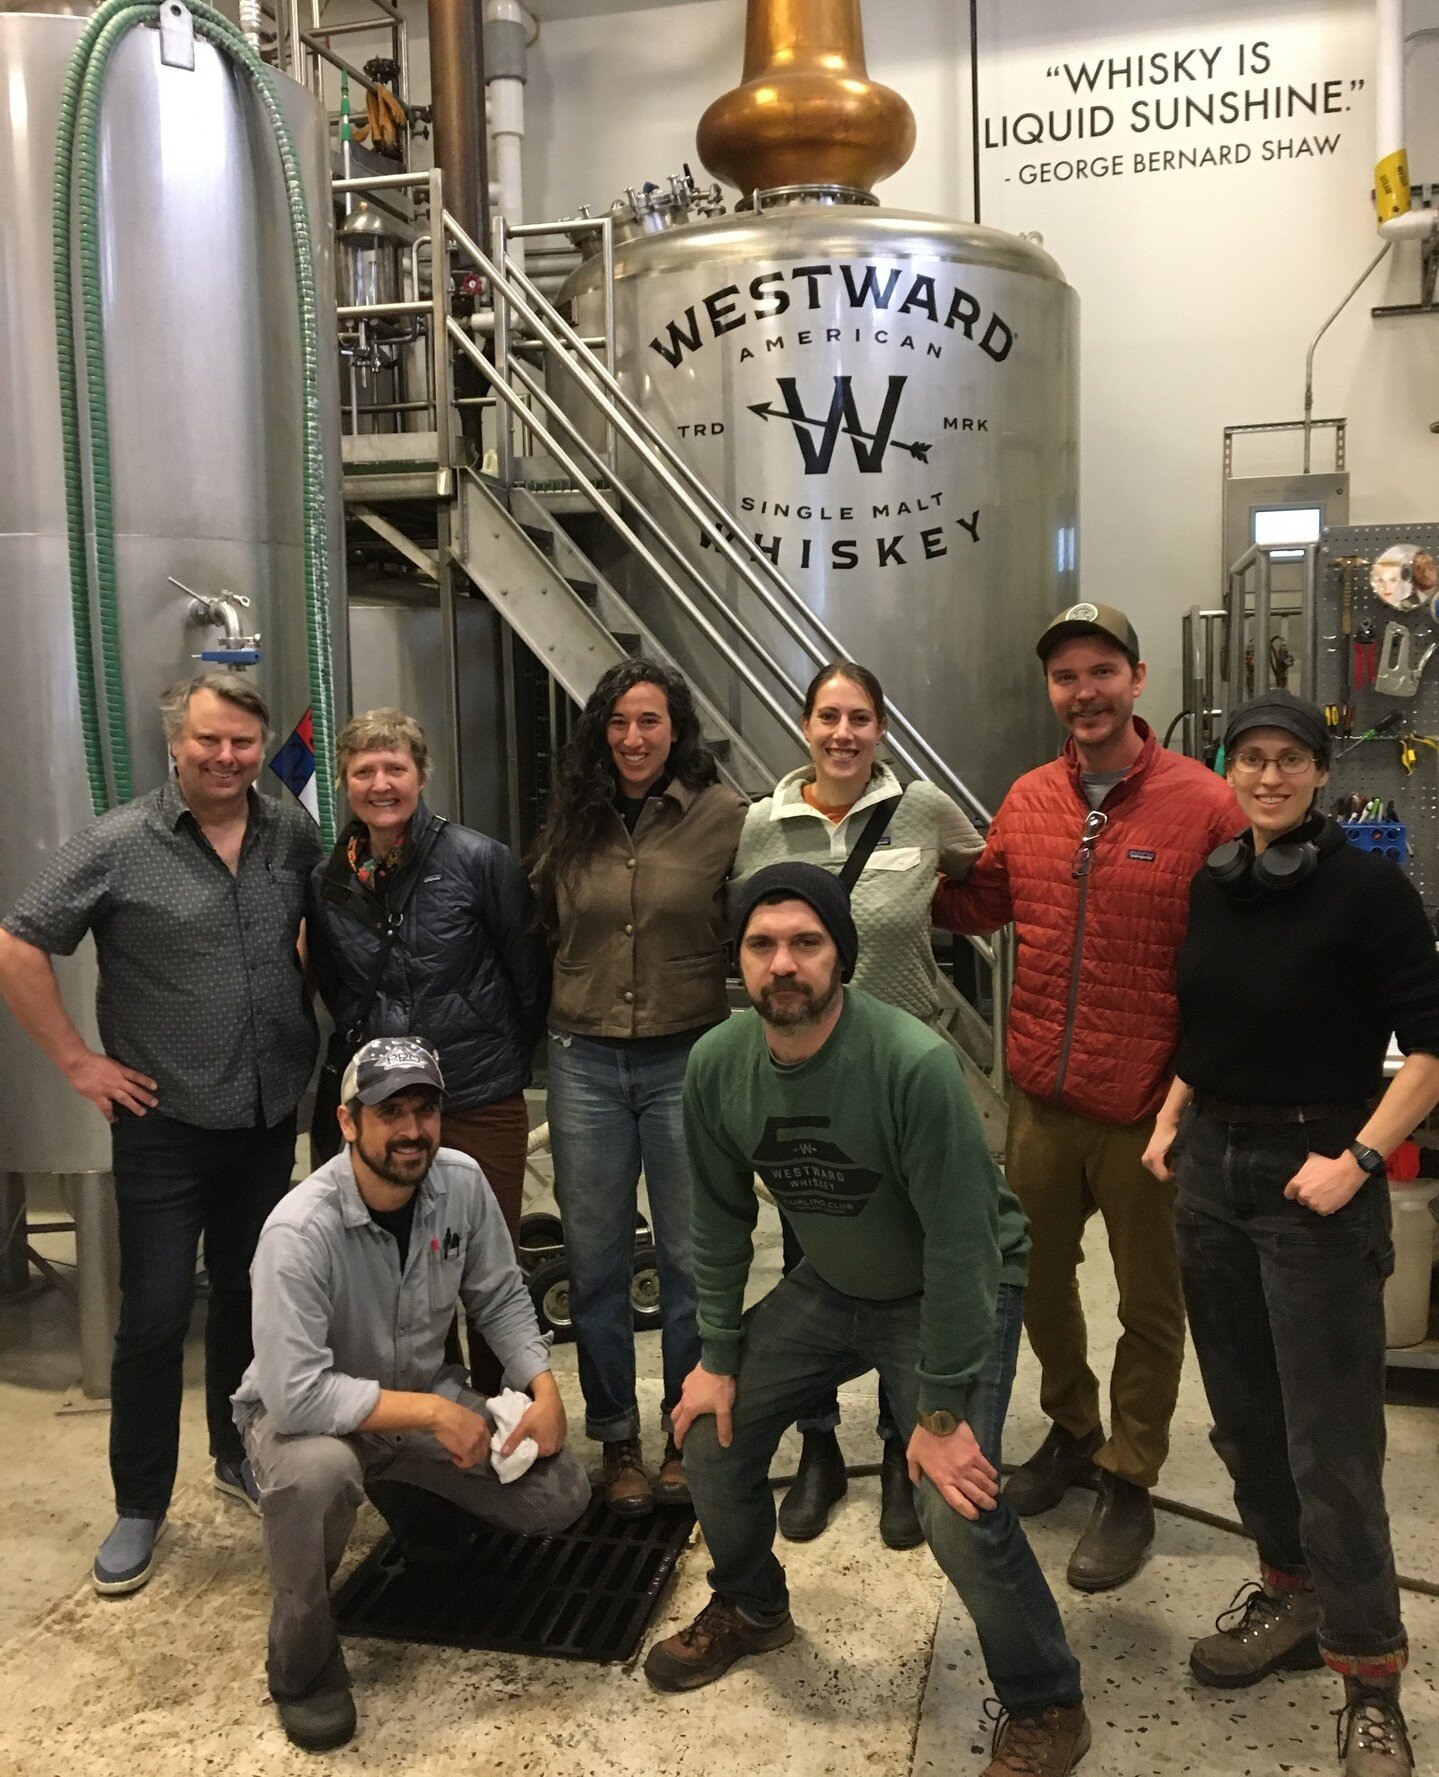 Hi all! Kether here, sharing a picture that brings together a whole lot of different aspects of my work in malt.⁠
⁠
In April I took an opportunity to visit Westward Whiskey and invited a few folks to join me there. Here in this photo is so much more 